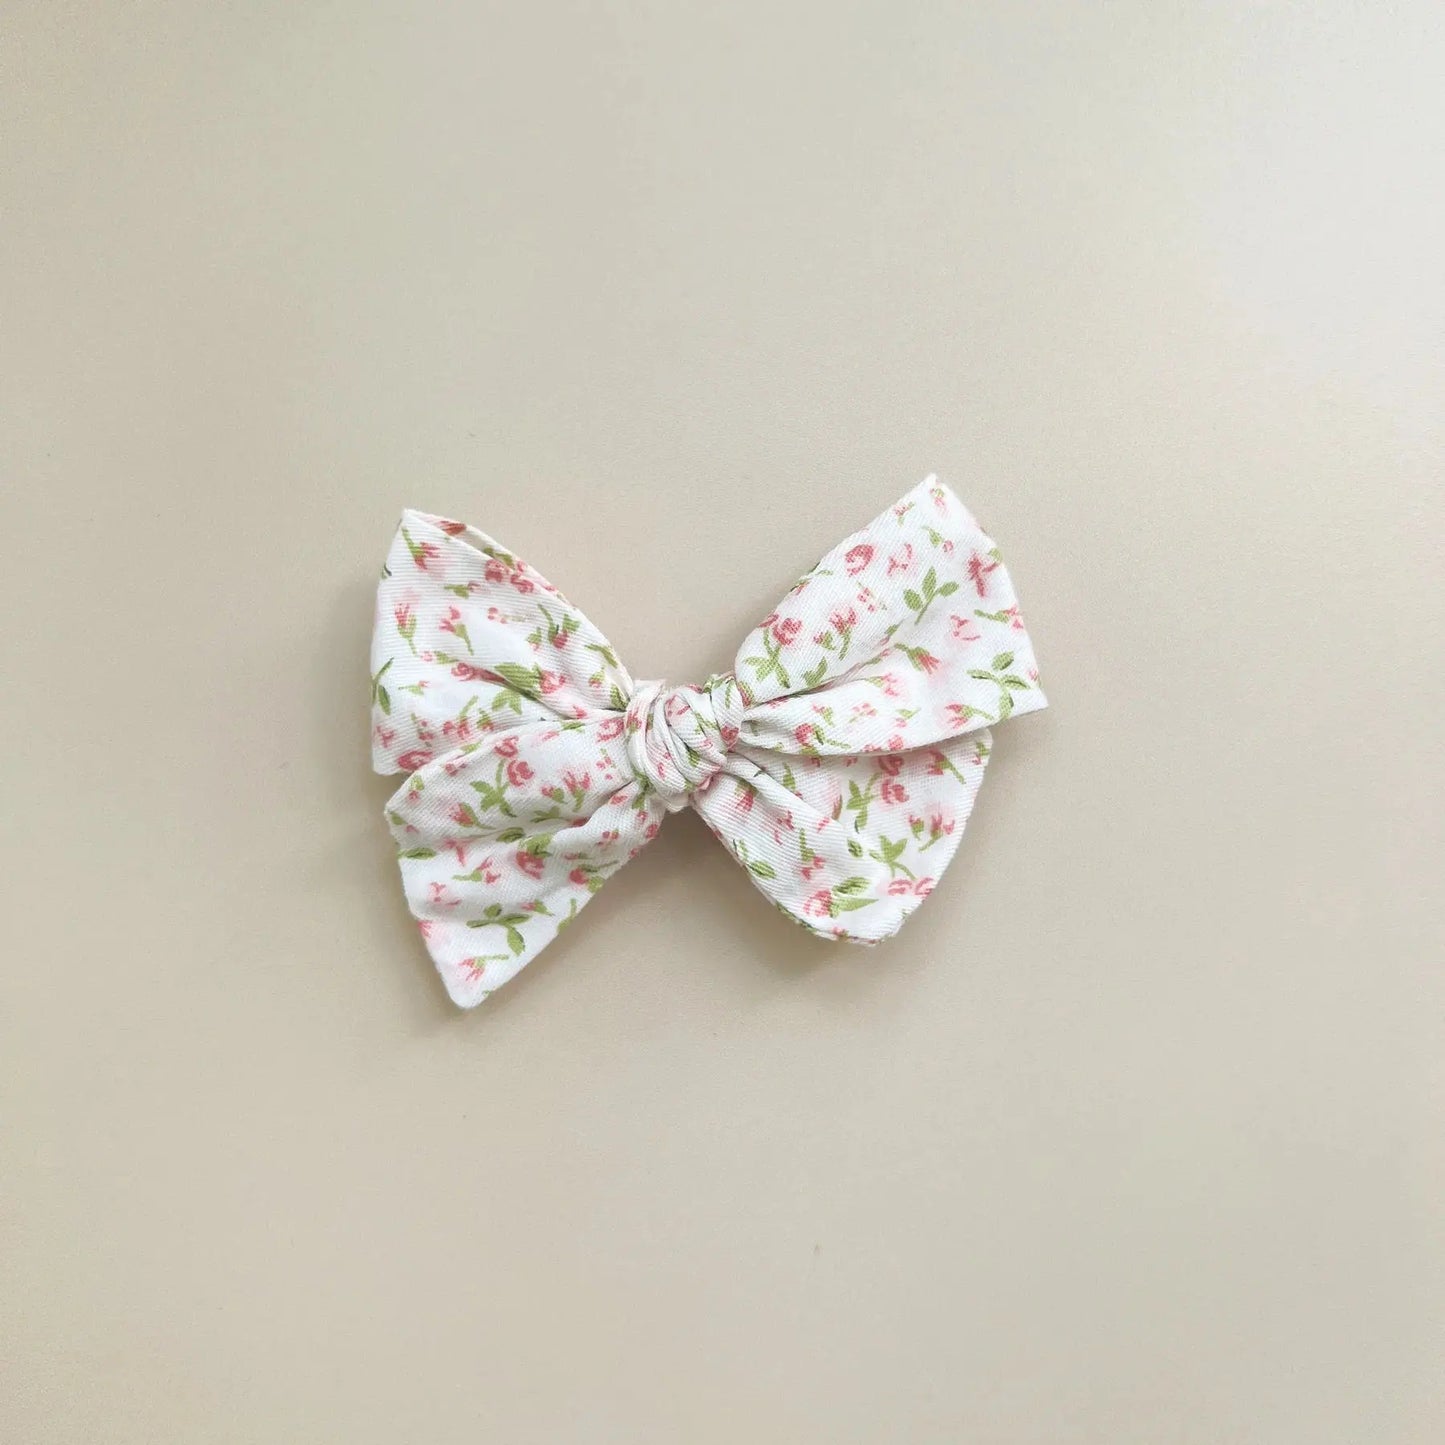 Little and Fern - Pinwheel Bow - Pink Dainty Floral - Birds & Bees baby boutique